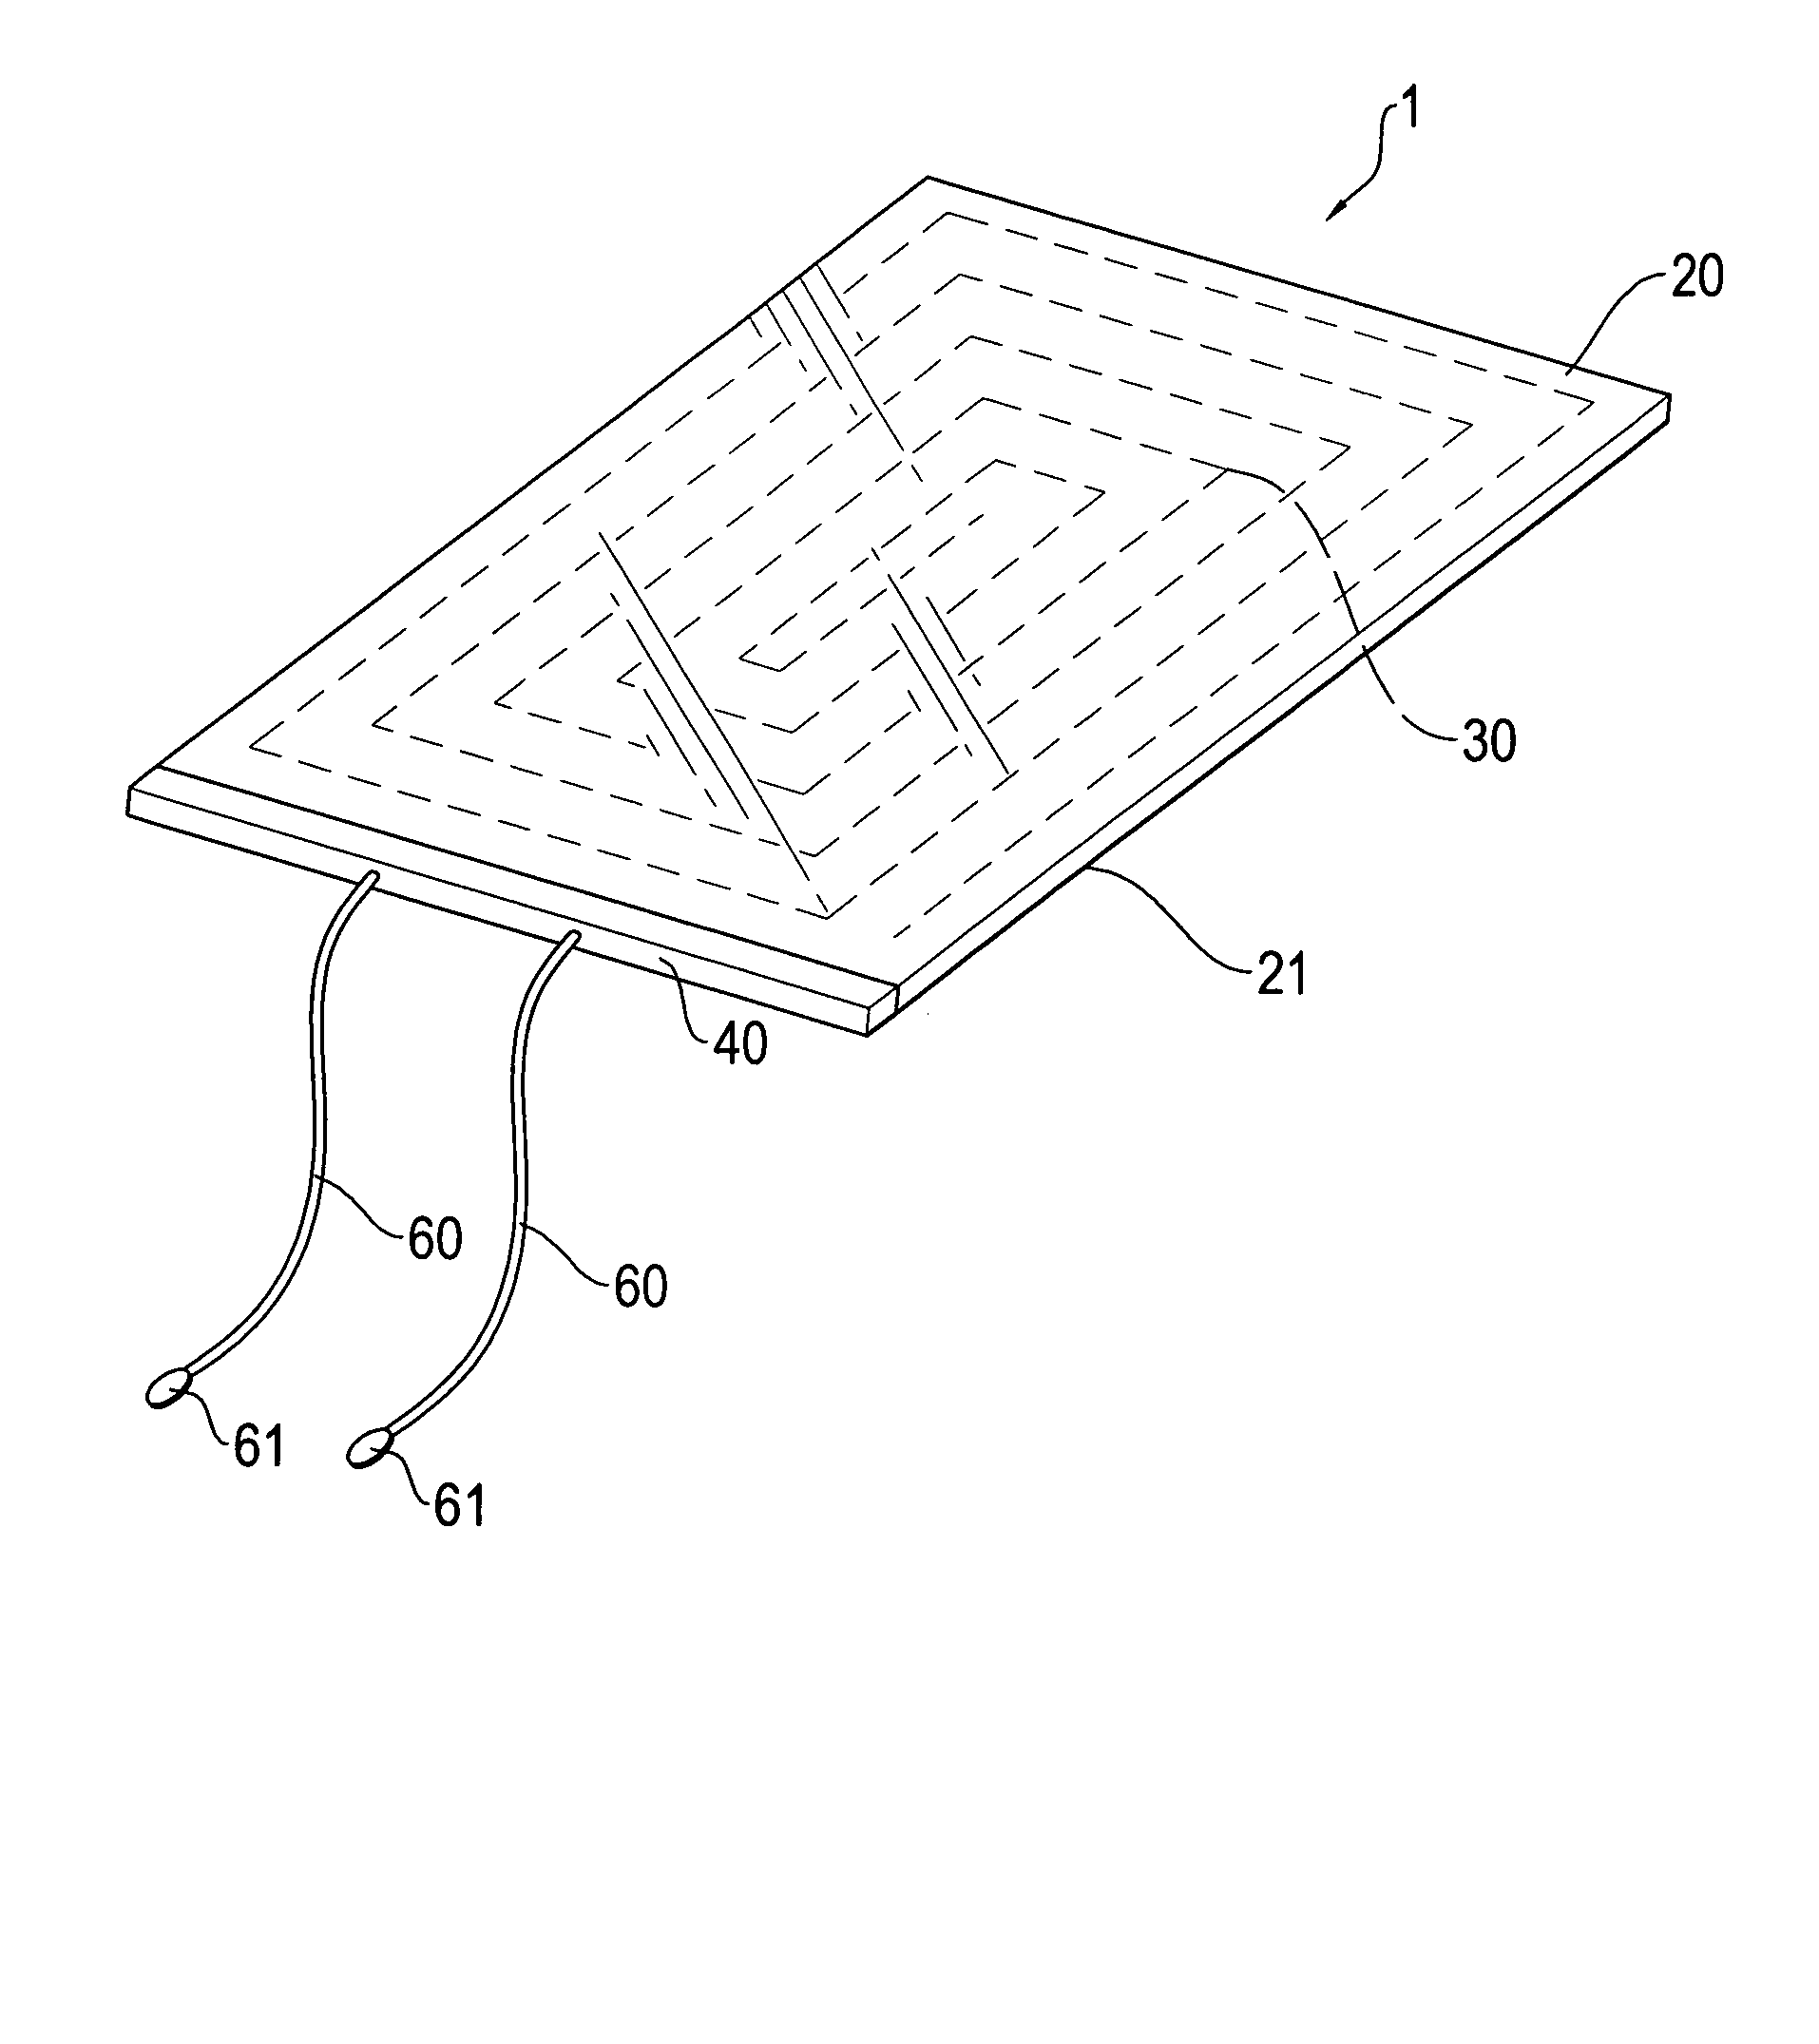 Attachable wireless charging device